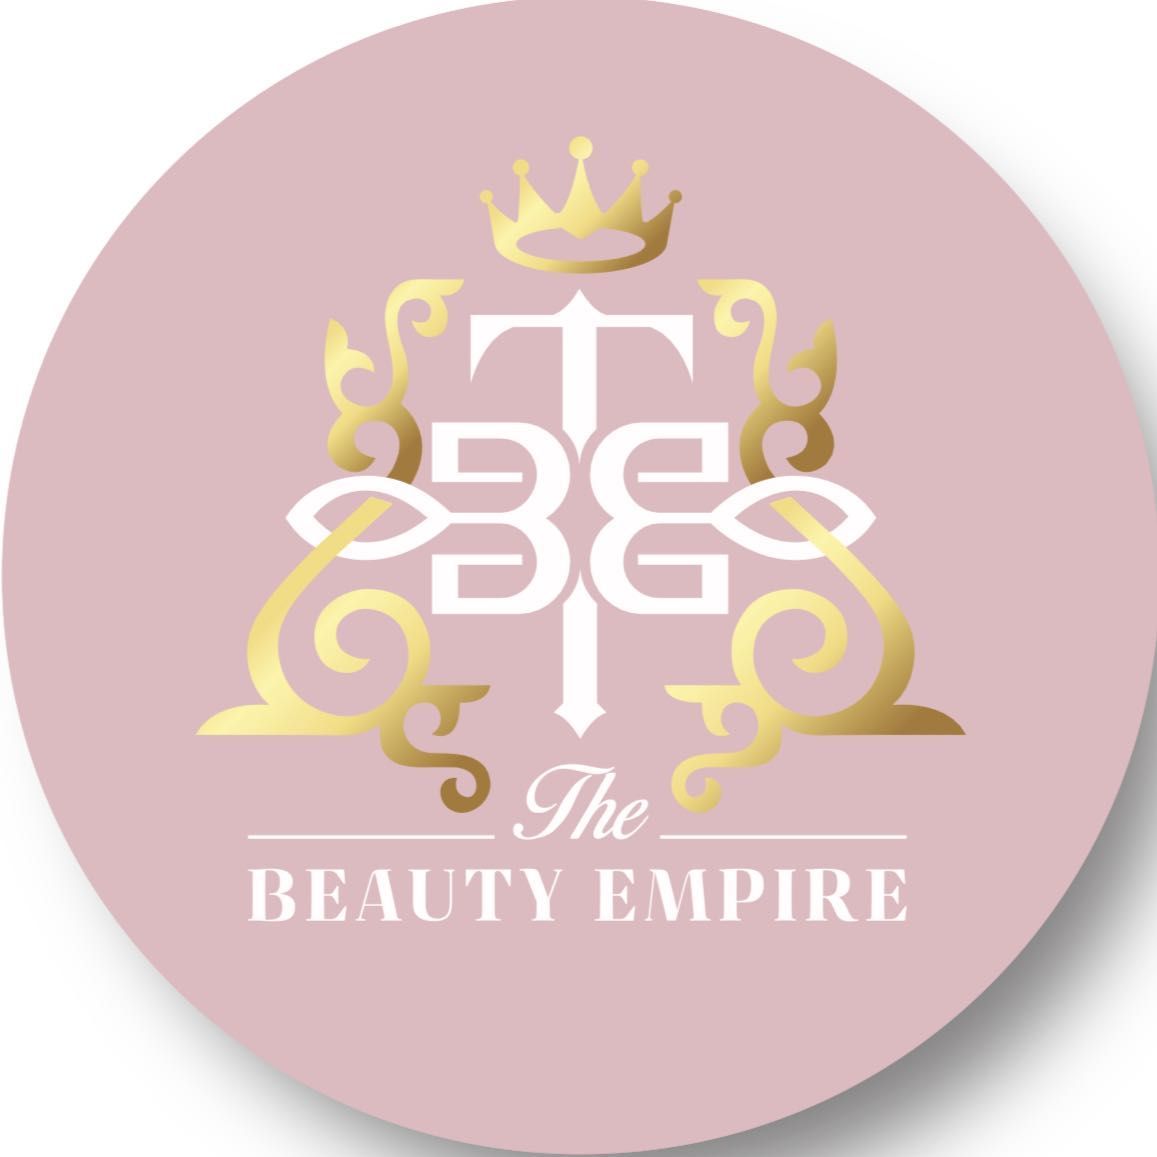 The Beauty Empire, 12995 S Cleveland Ave, Suite 247, Fort Myers, 33907